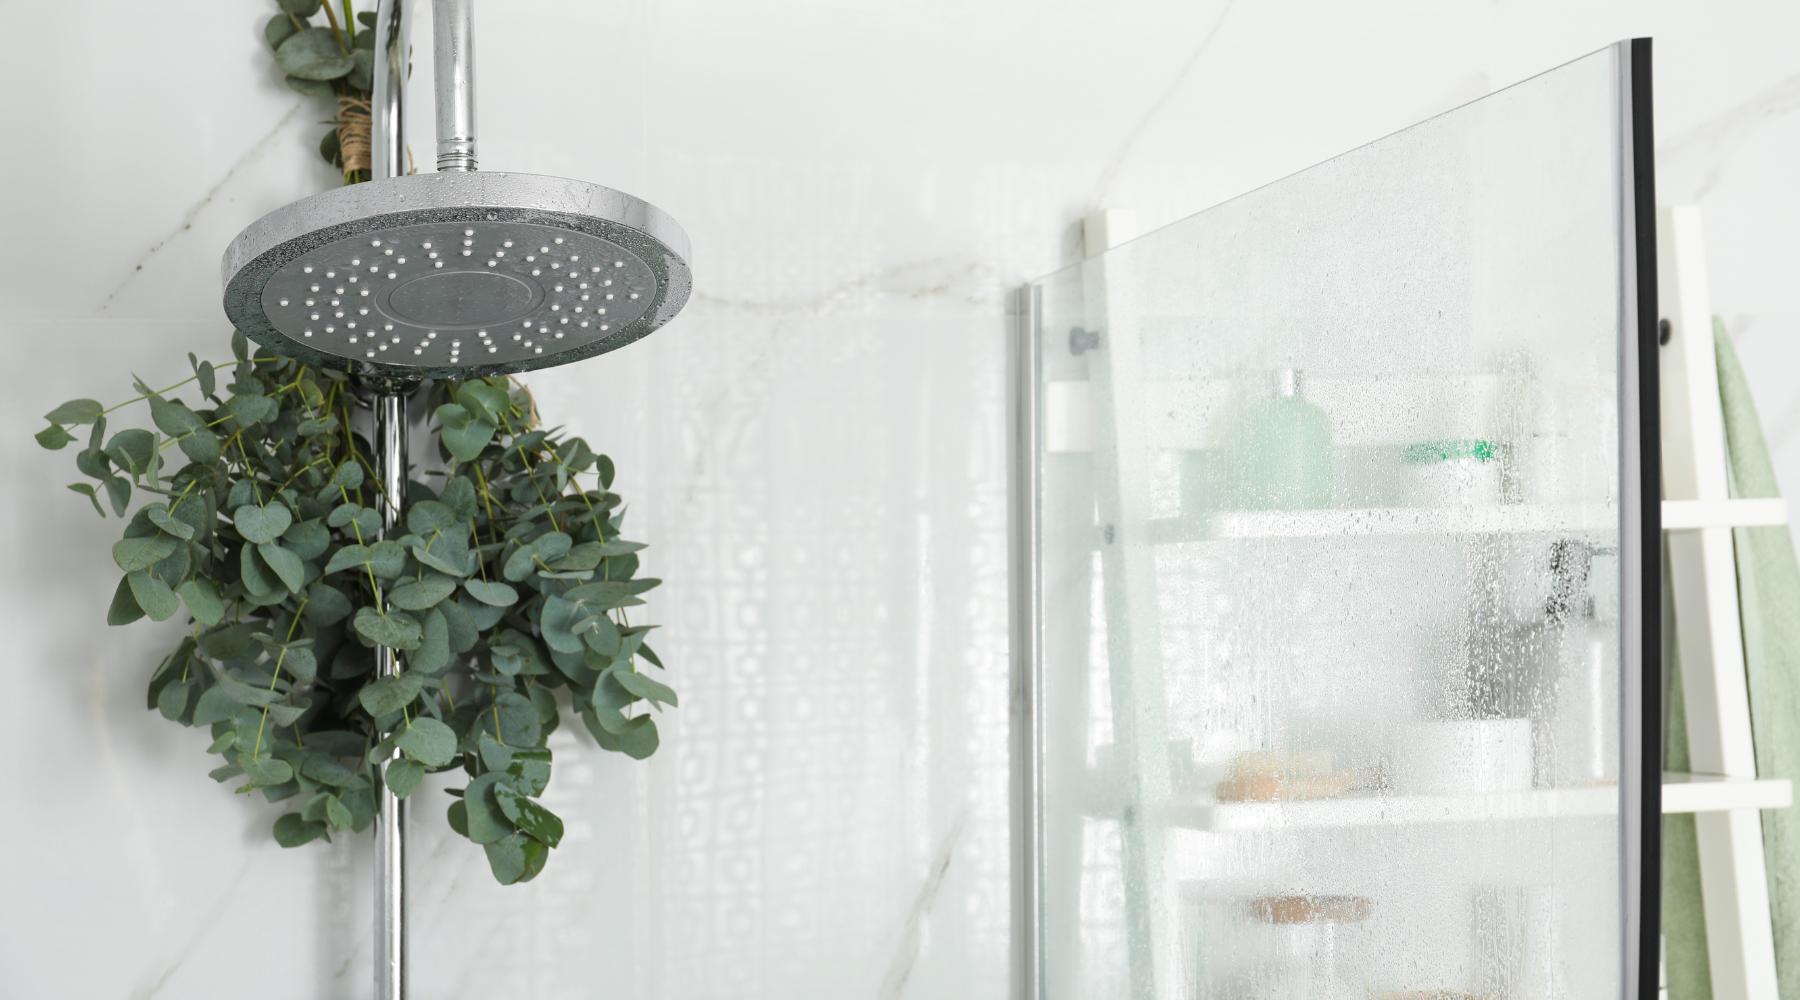 Image of a chrome shower head  with a bunch of eucalyptus tied above it, background is a white bathroom.